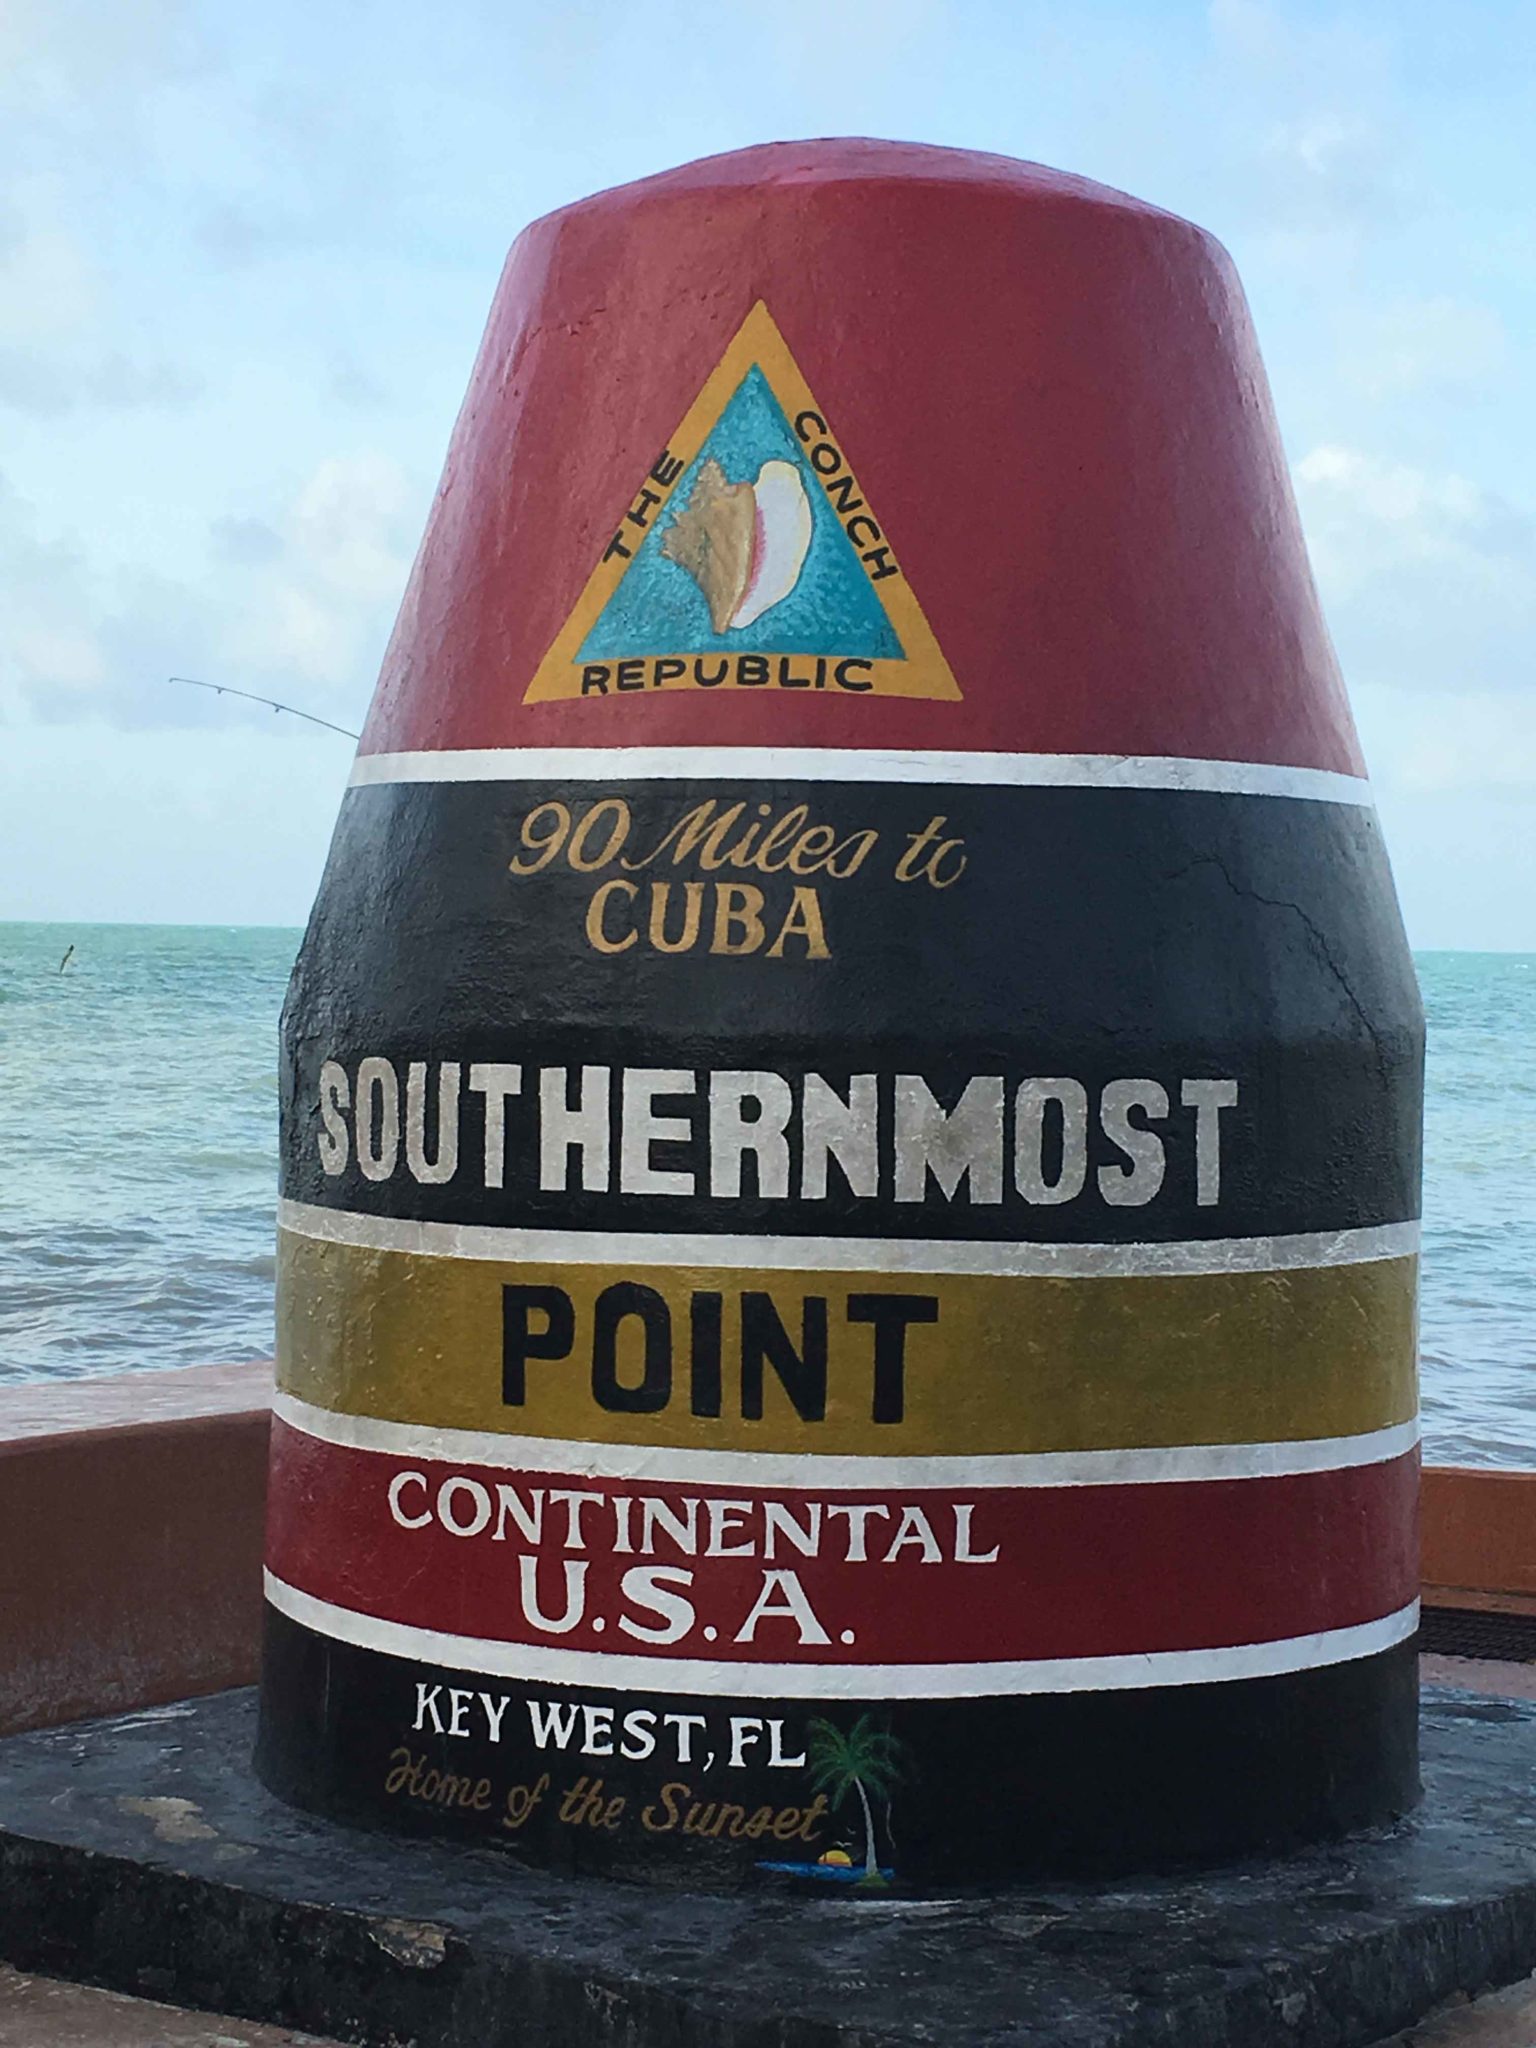 25 Things to Do in Key West